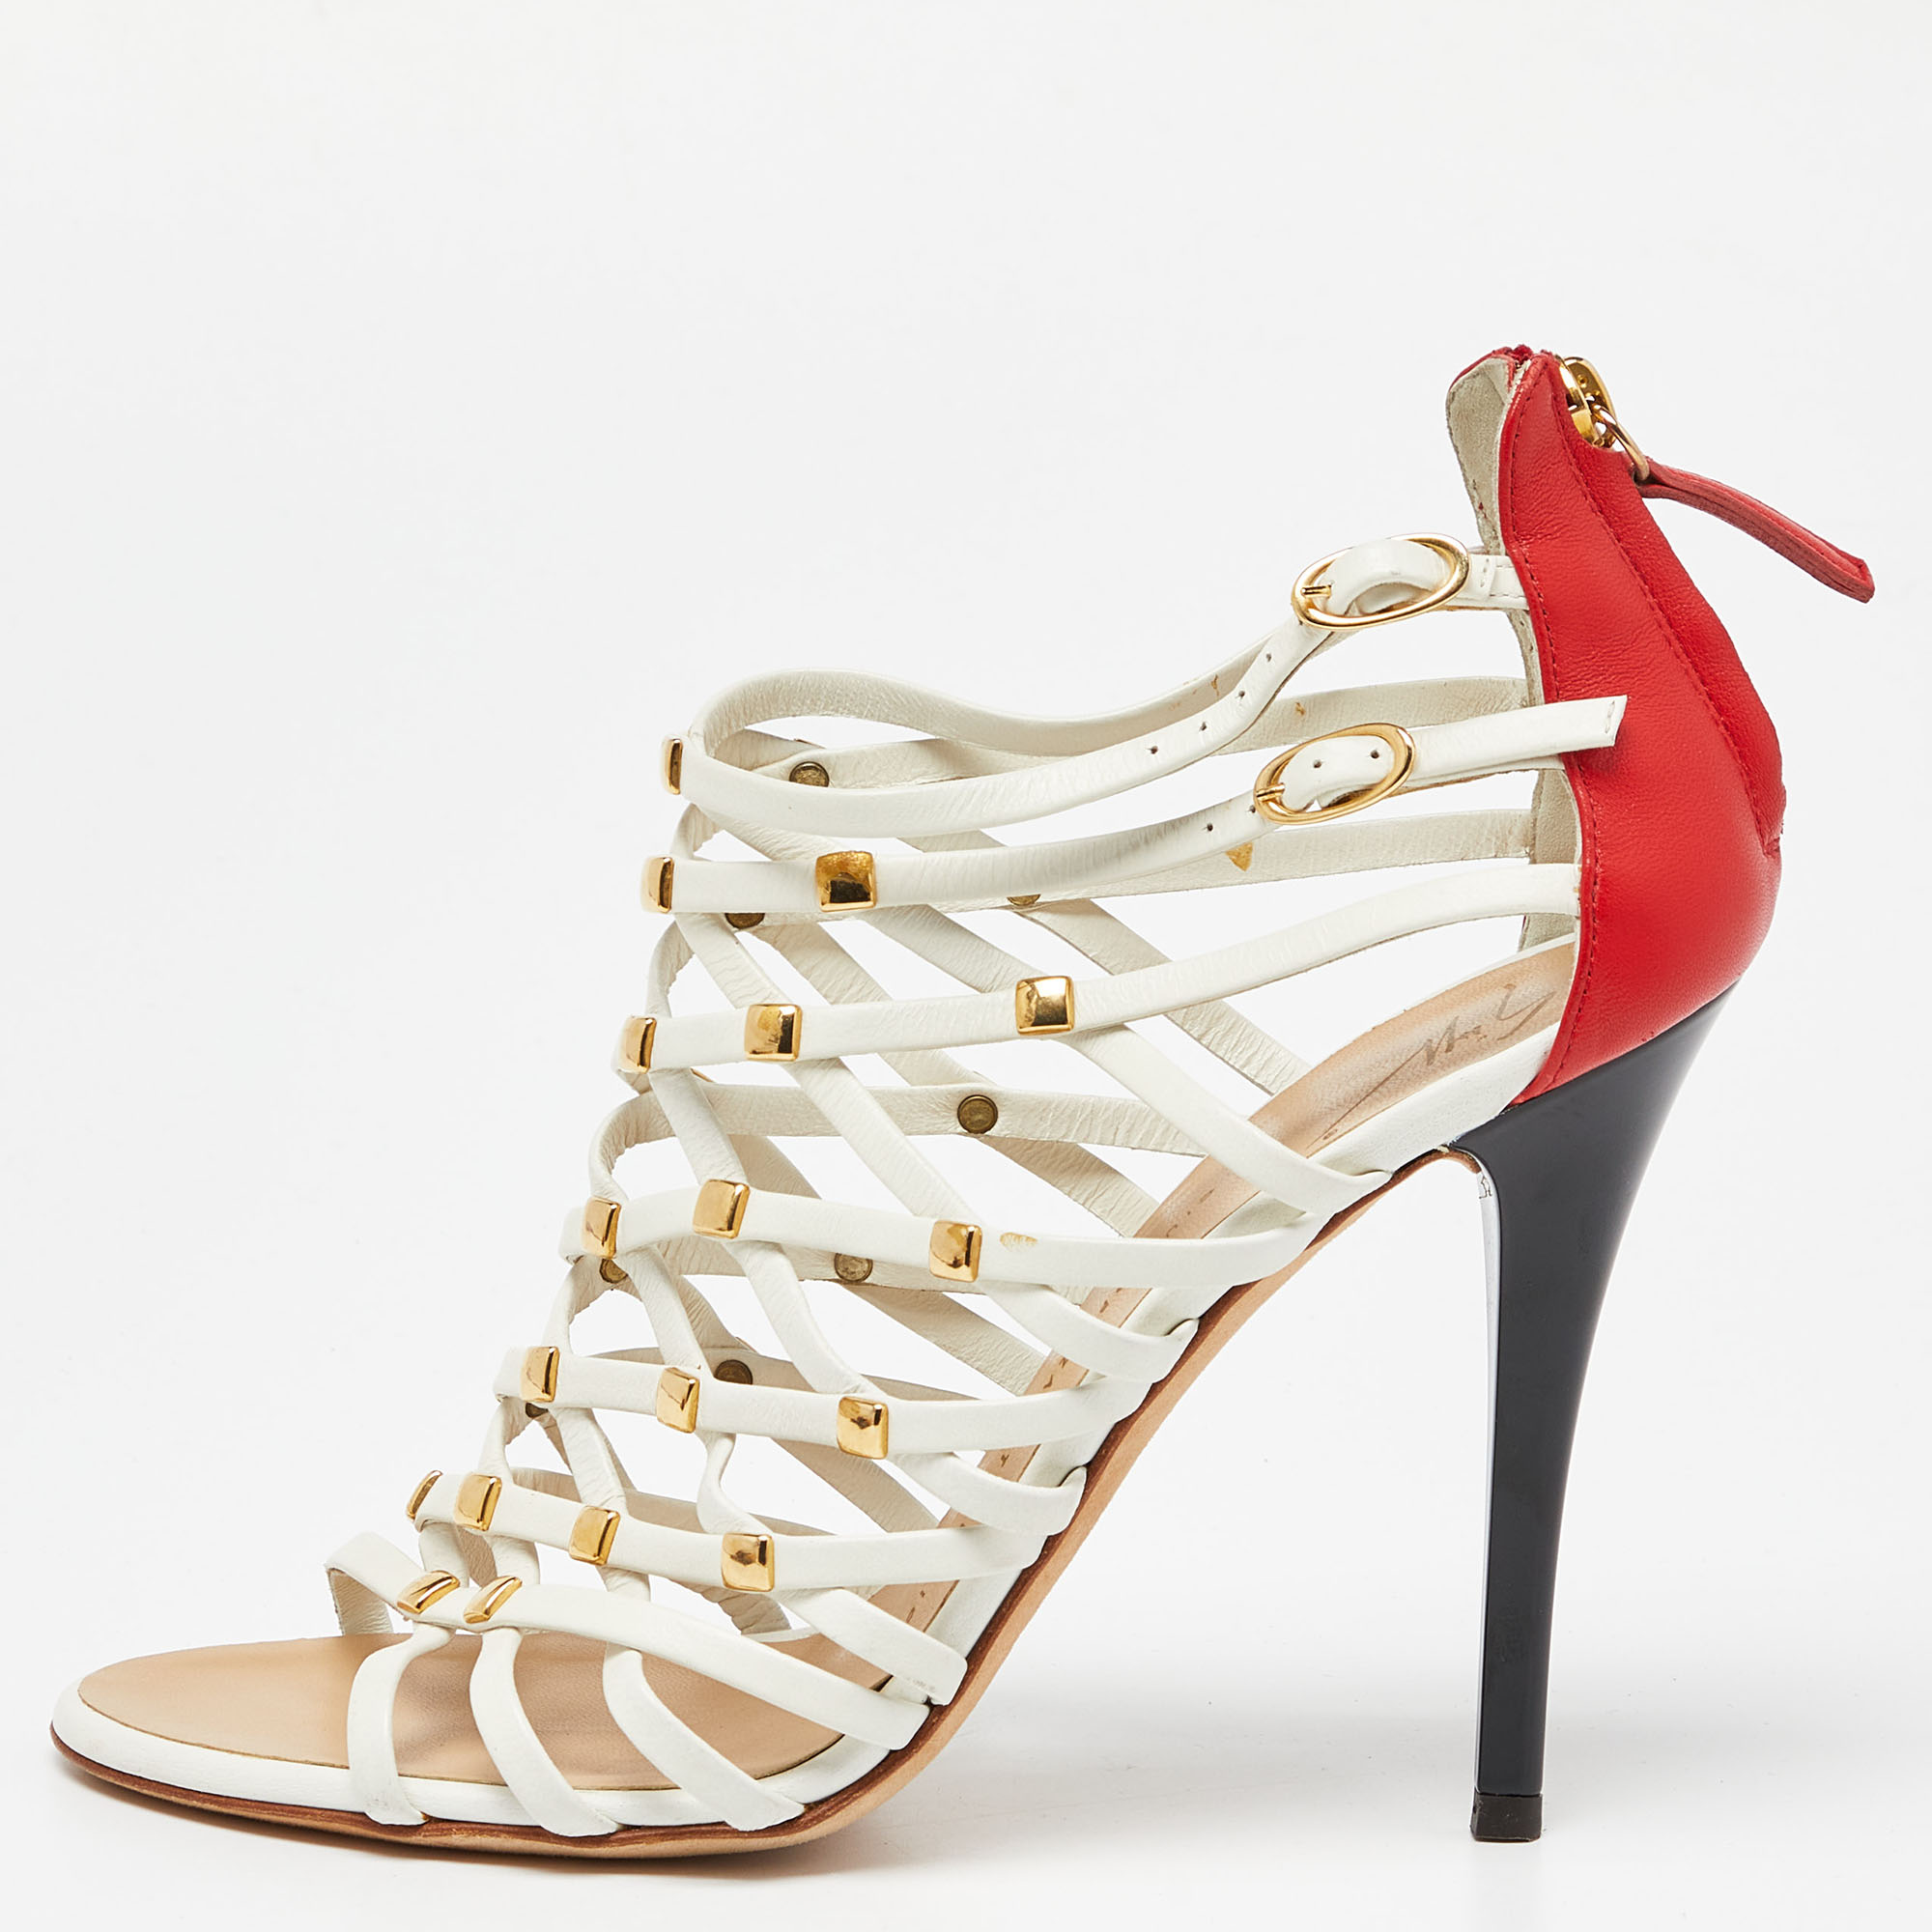 Pre-owned Giuseppe Zanotti White/red Leather Embellished Strappy Sandals Size 38.5